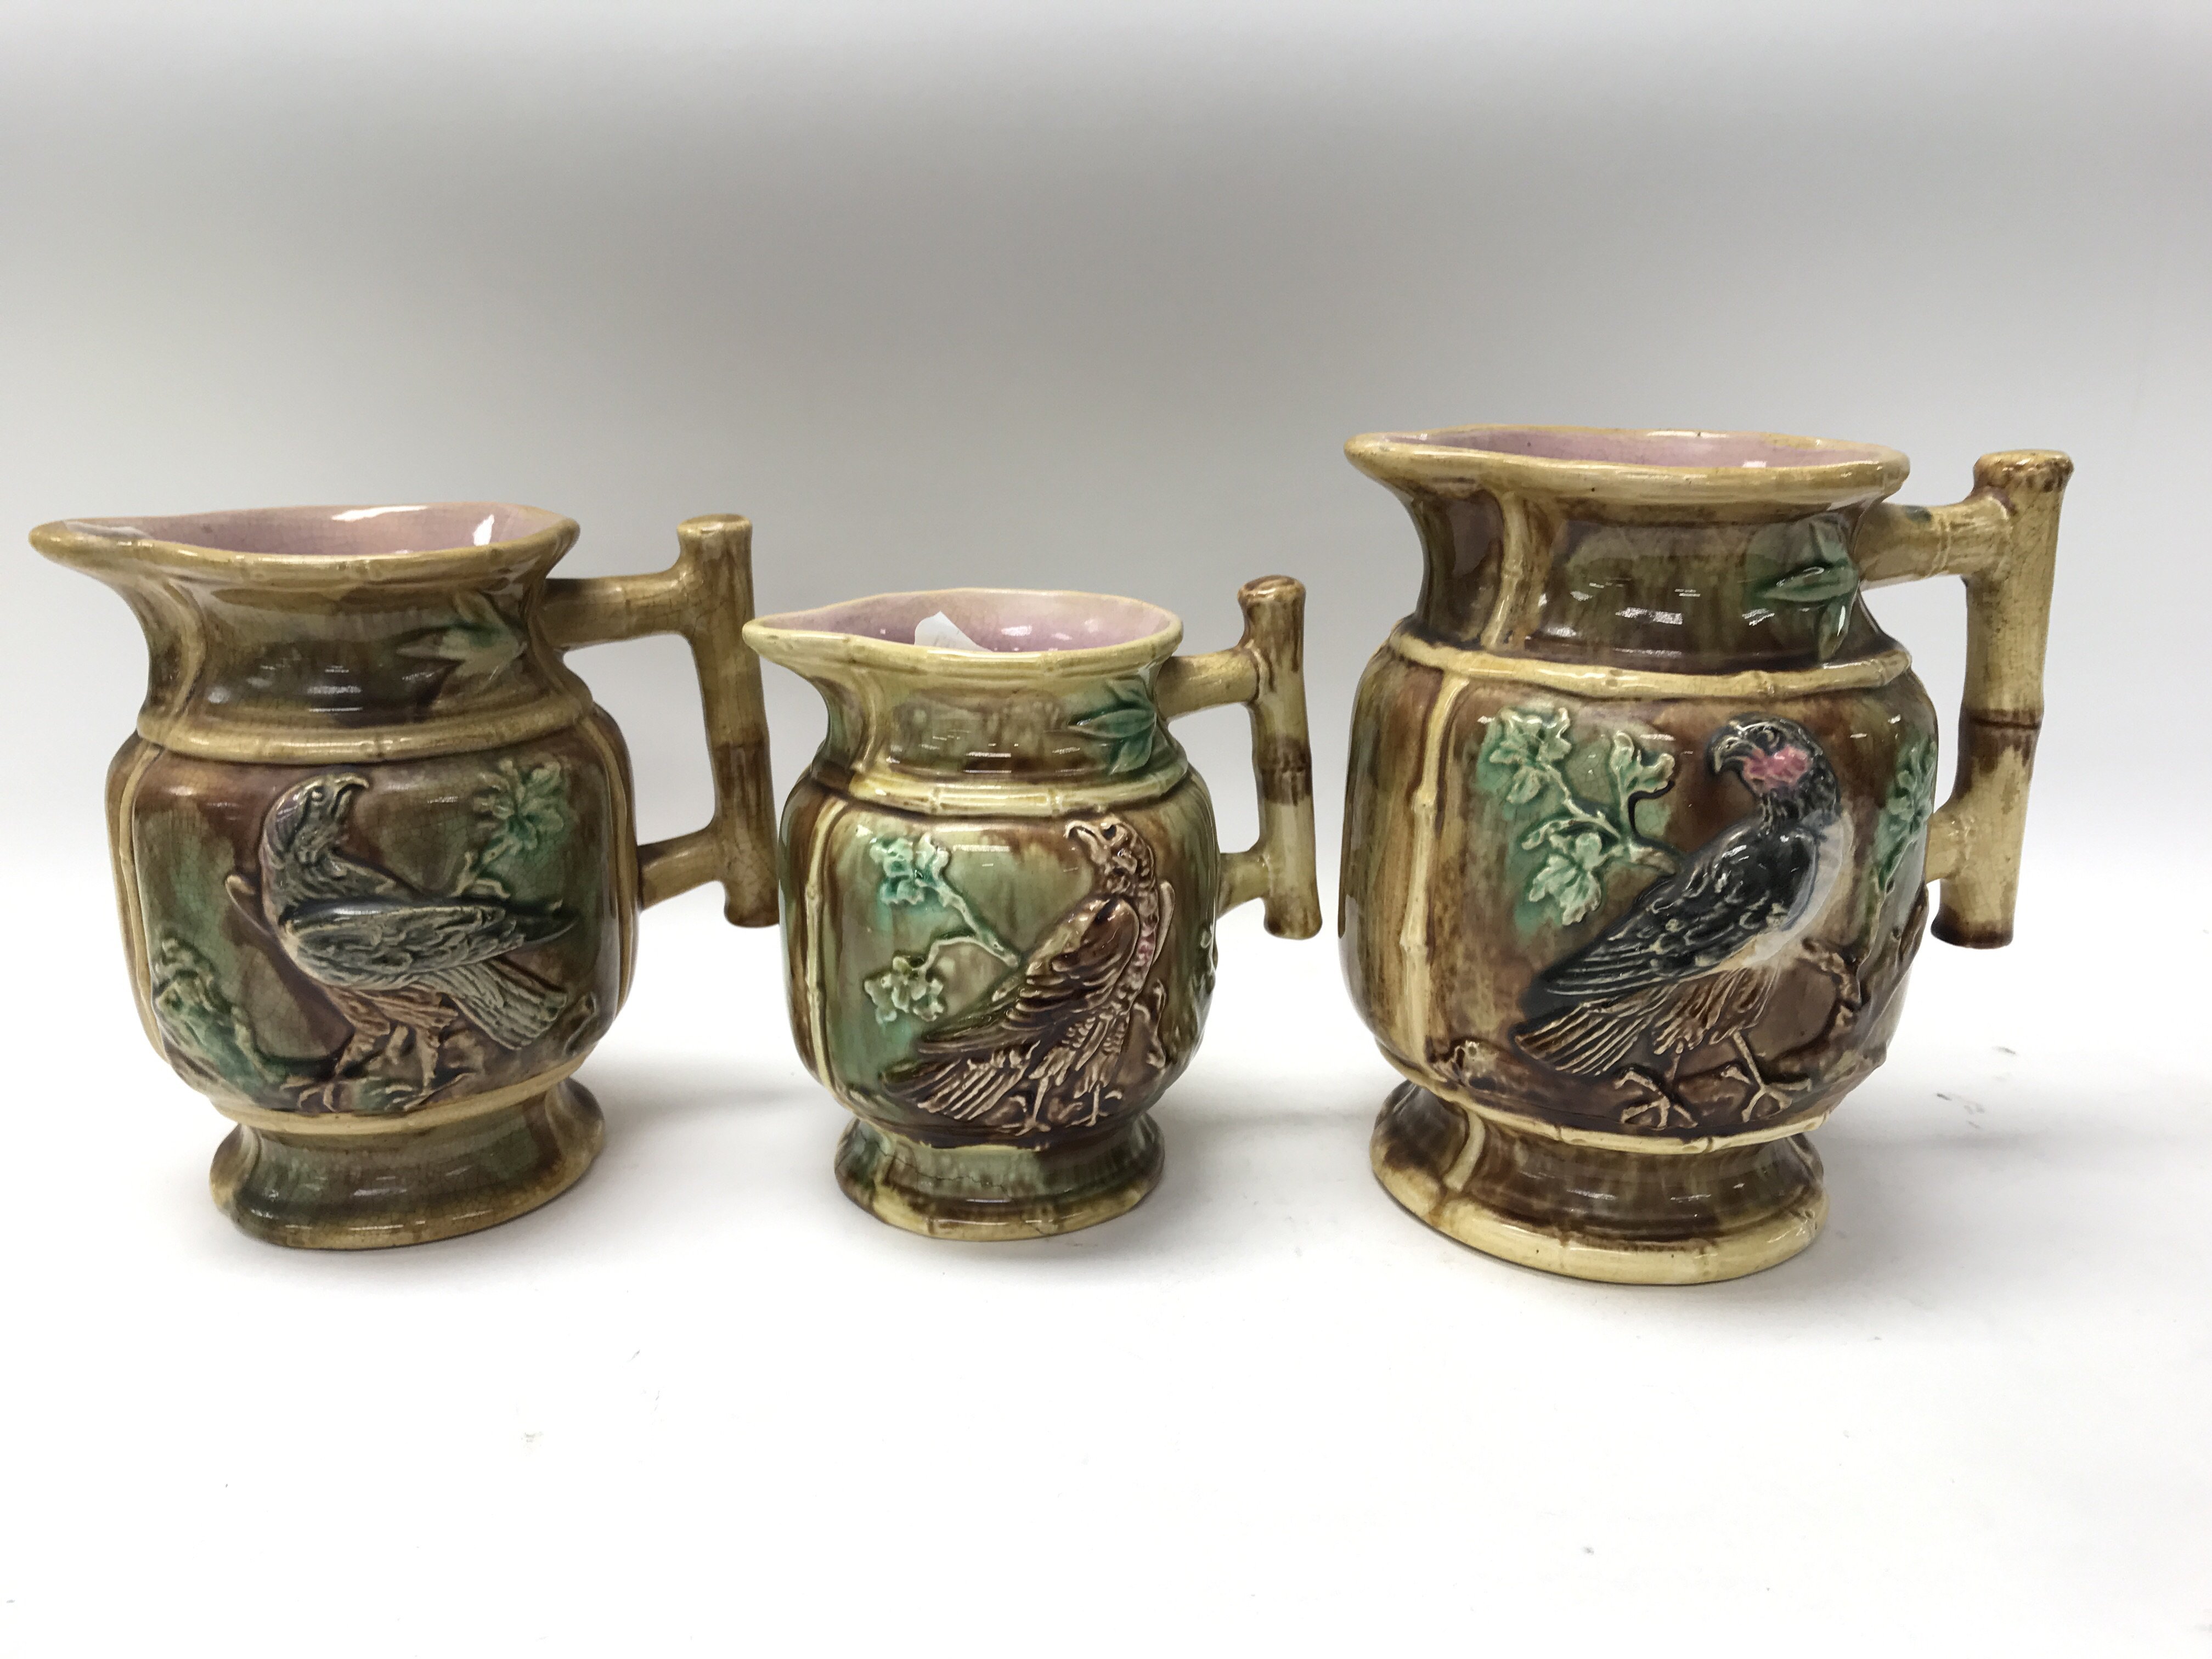 A collection of three late 19th century continenta